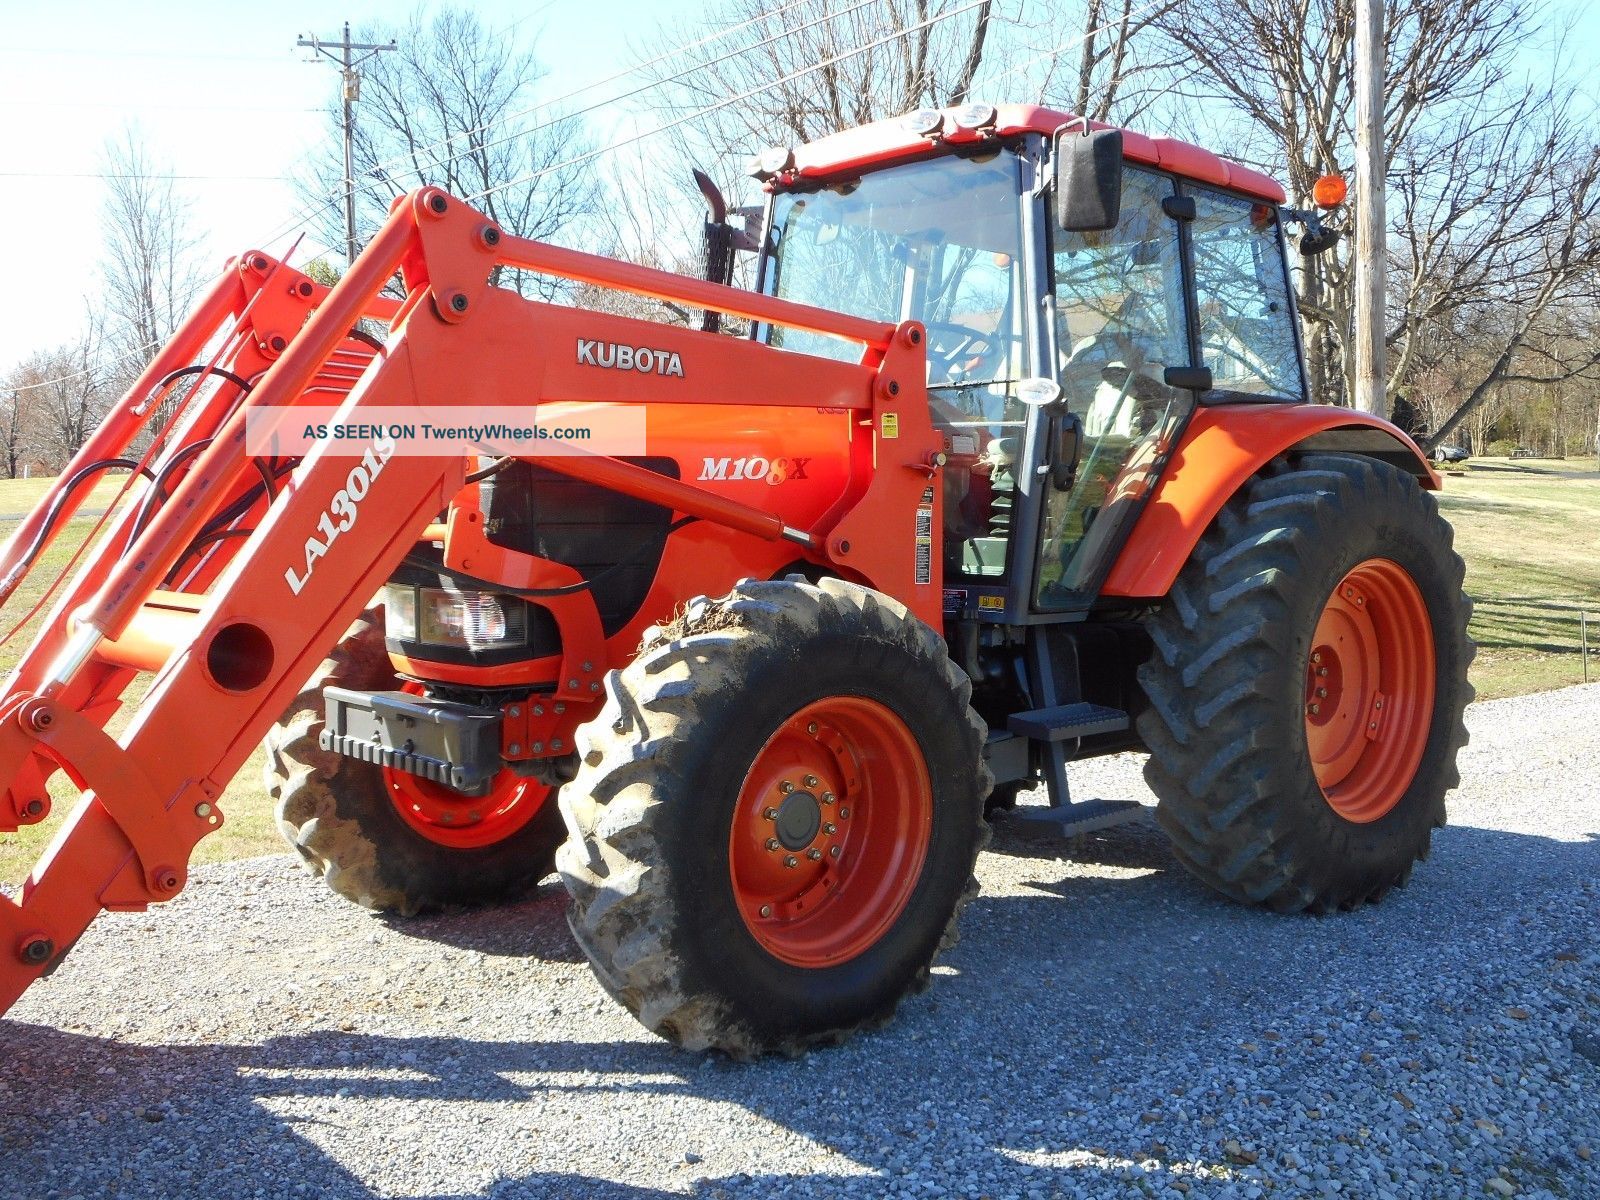 1 Owner Kubota M108x Cab+loader+4x4 With 748 Hours Condition Tractors photo